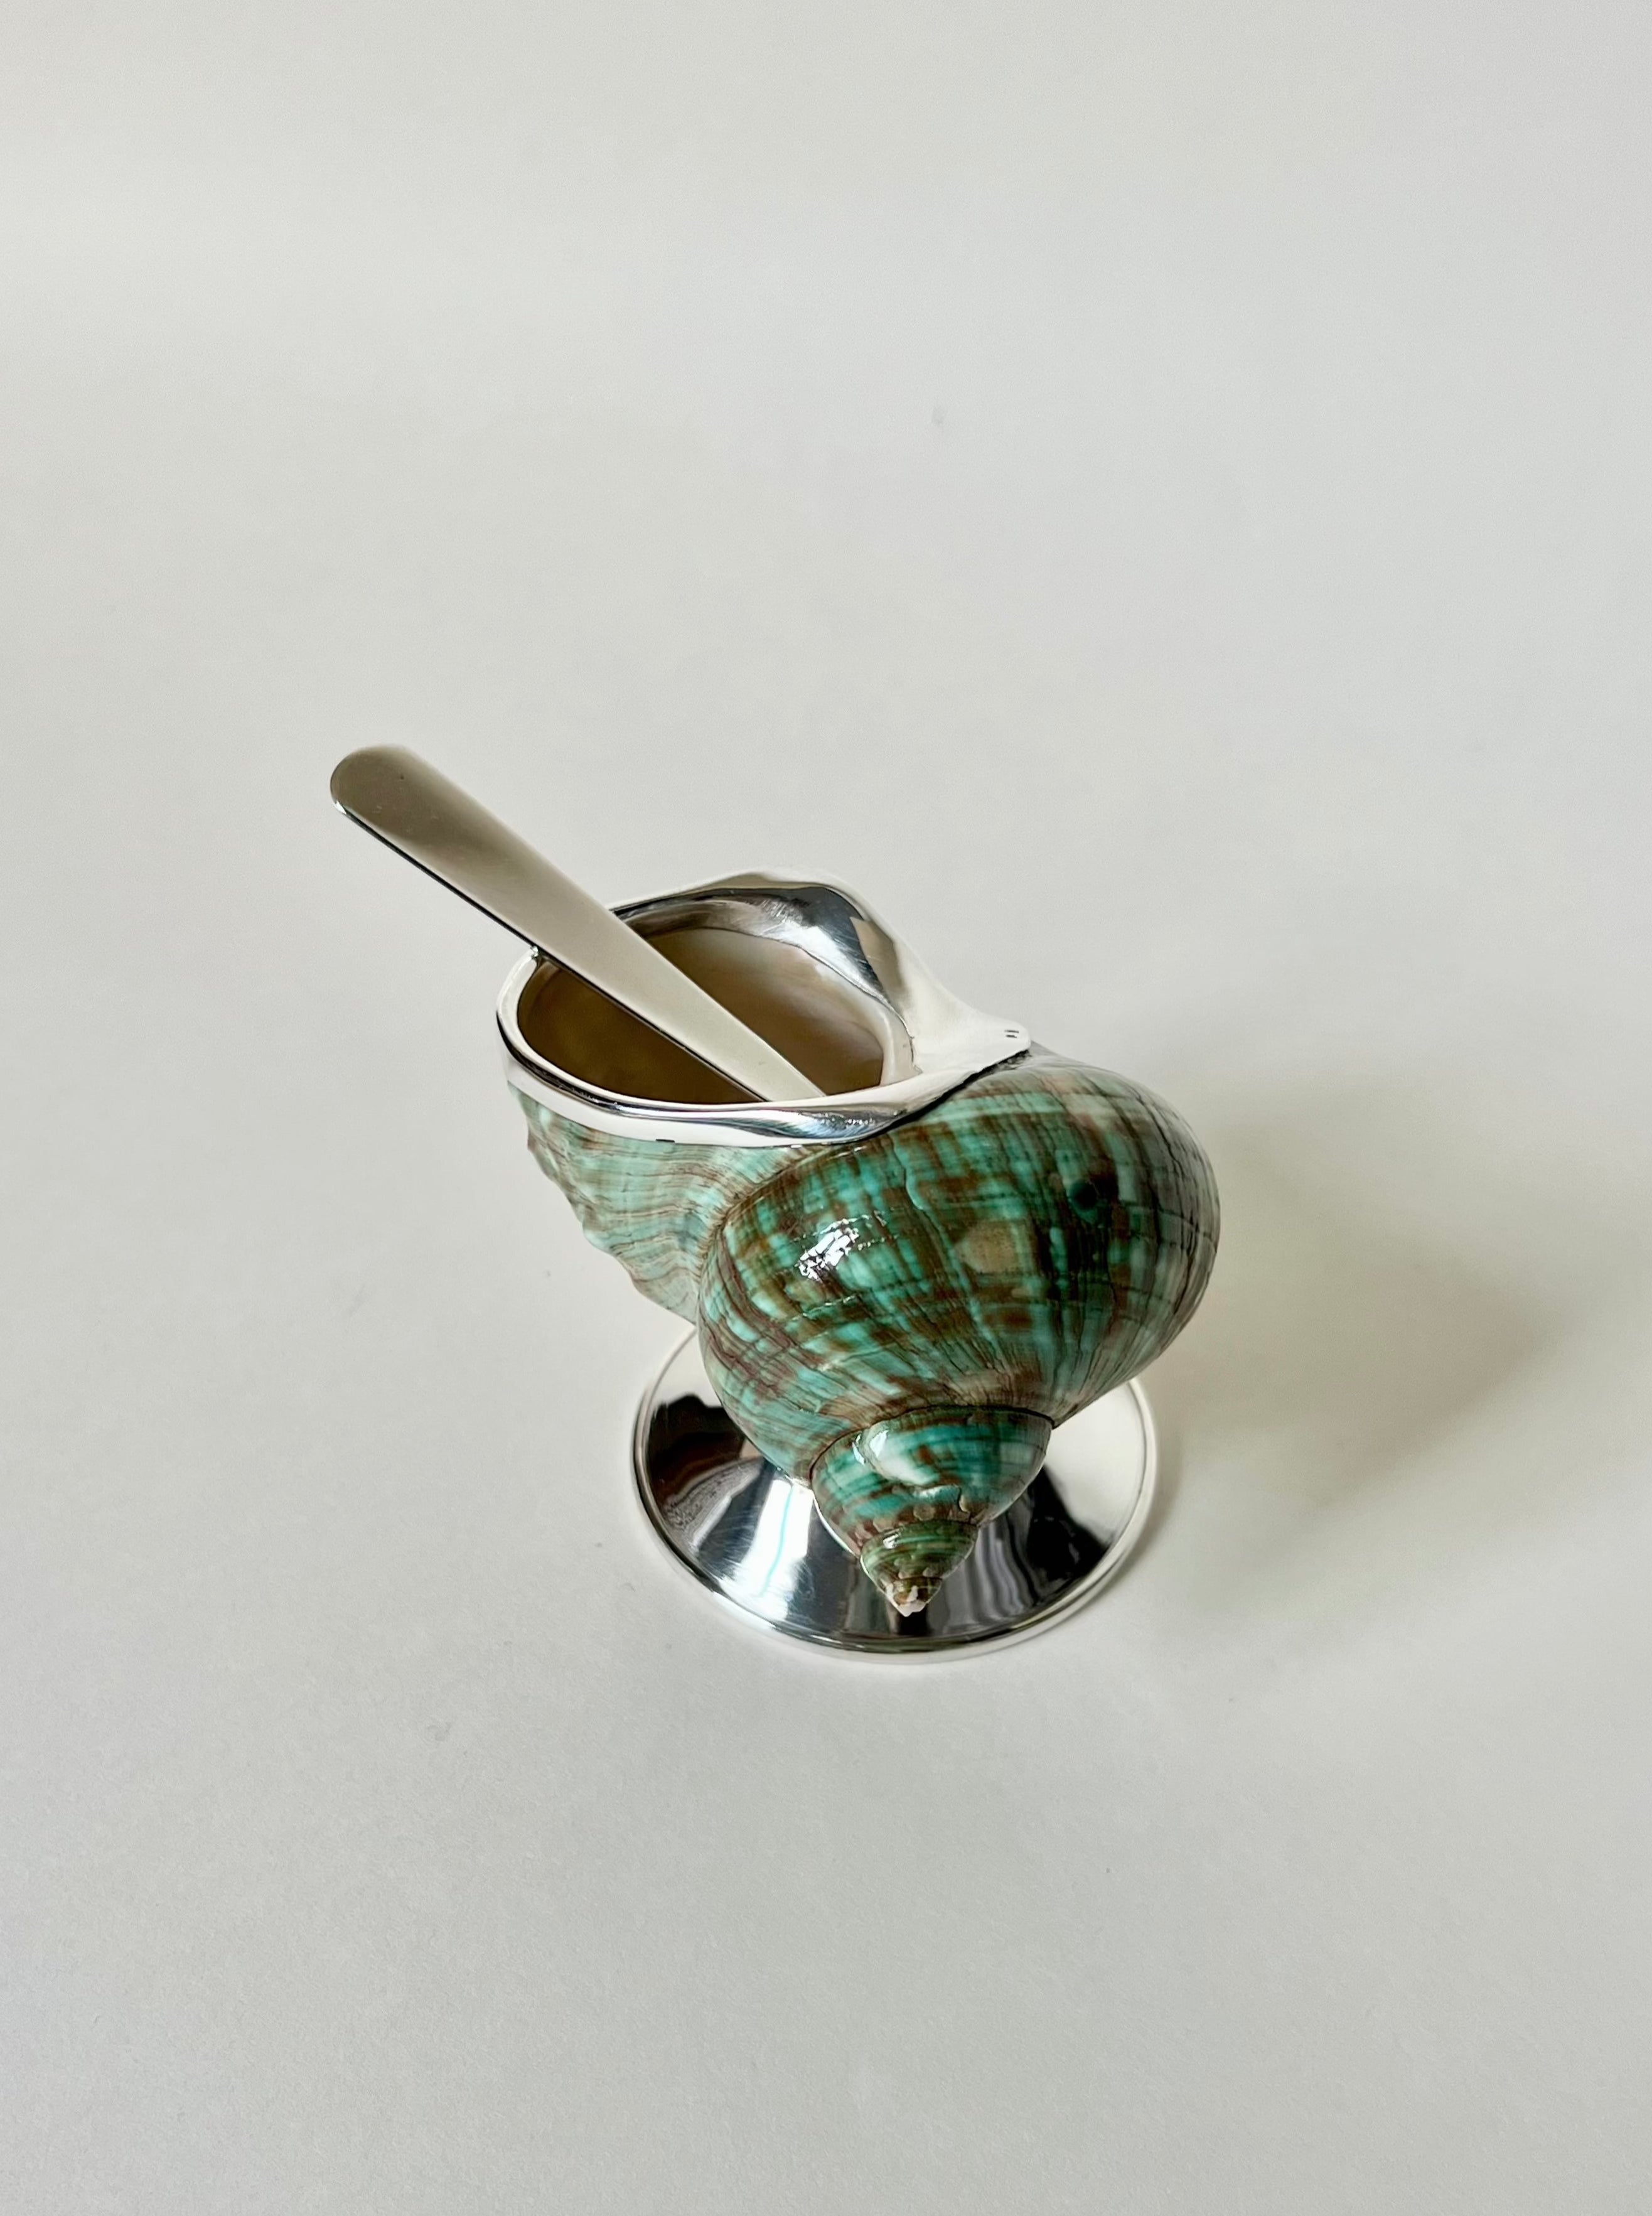 Elegant and stylish Jade Shell Sugar Bowl with a unique sea-inspired design